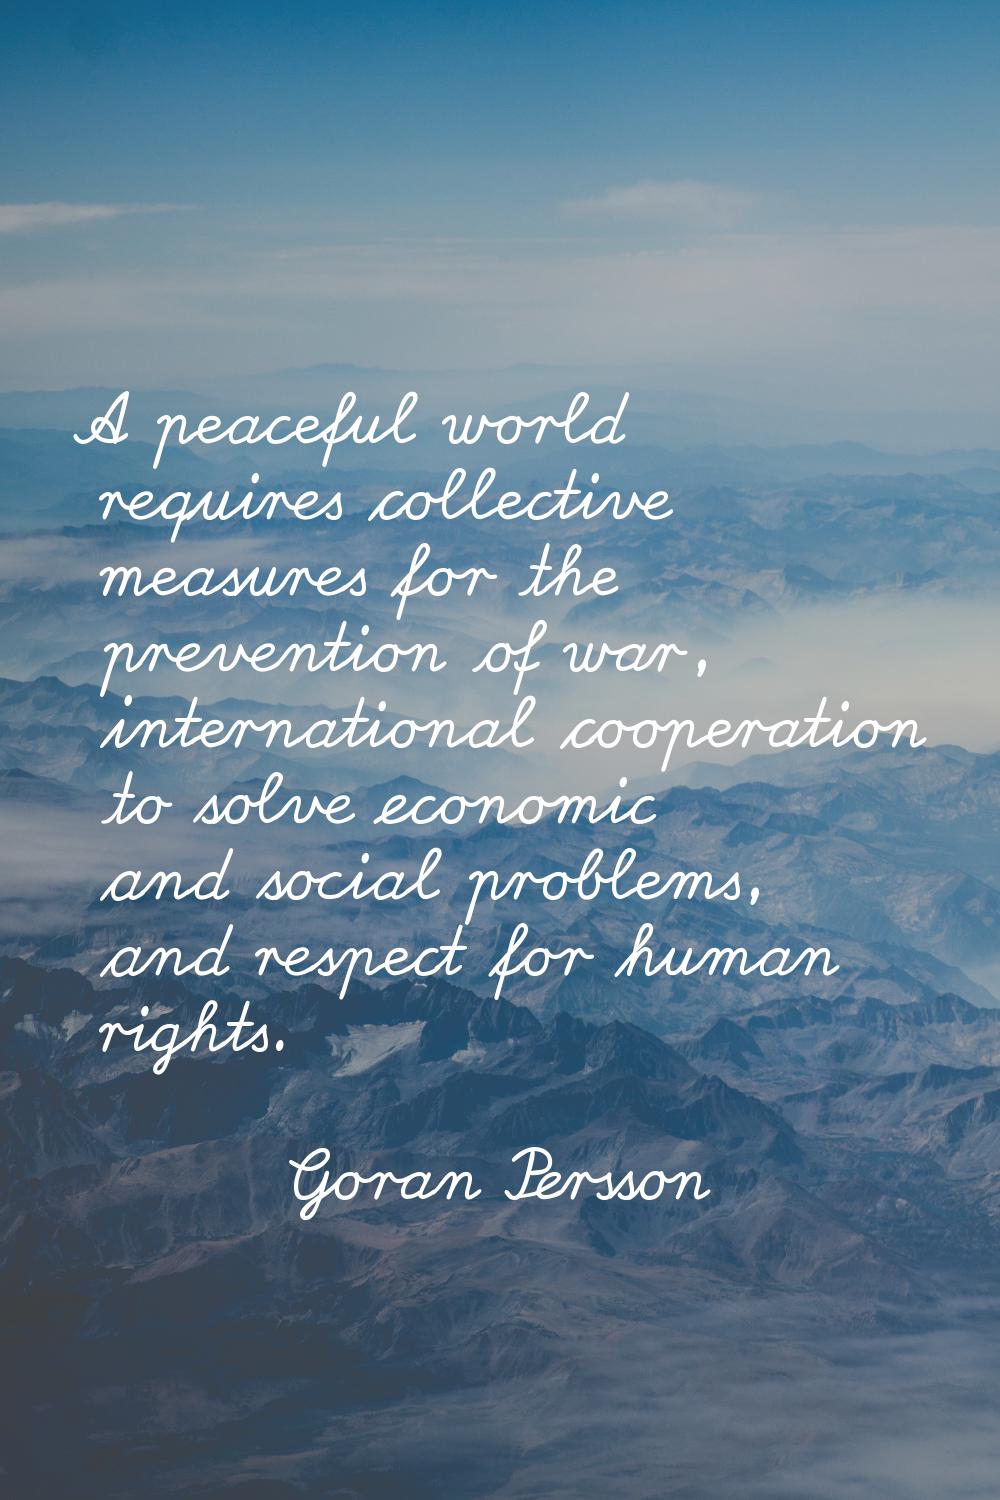 A peaceful world requires collective measures for the prevention of war, international cooperation 